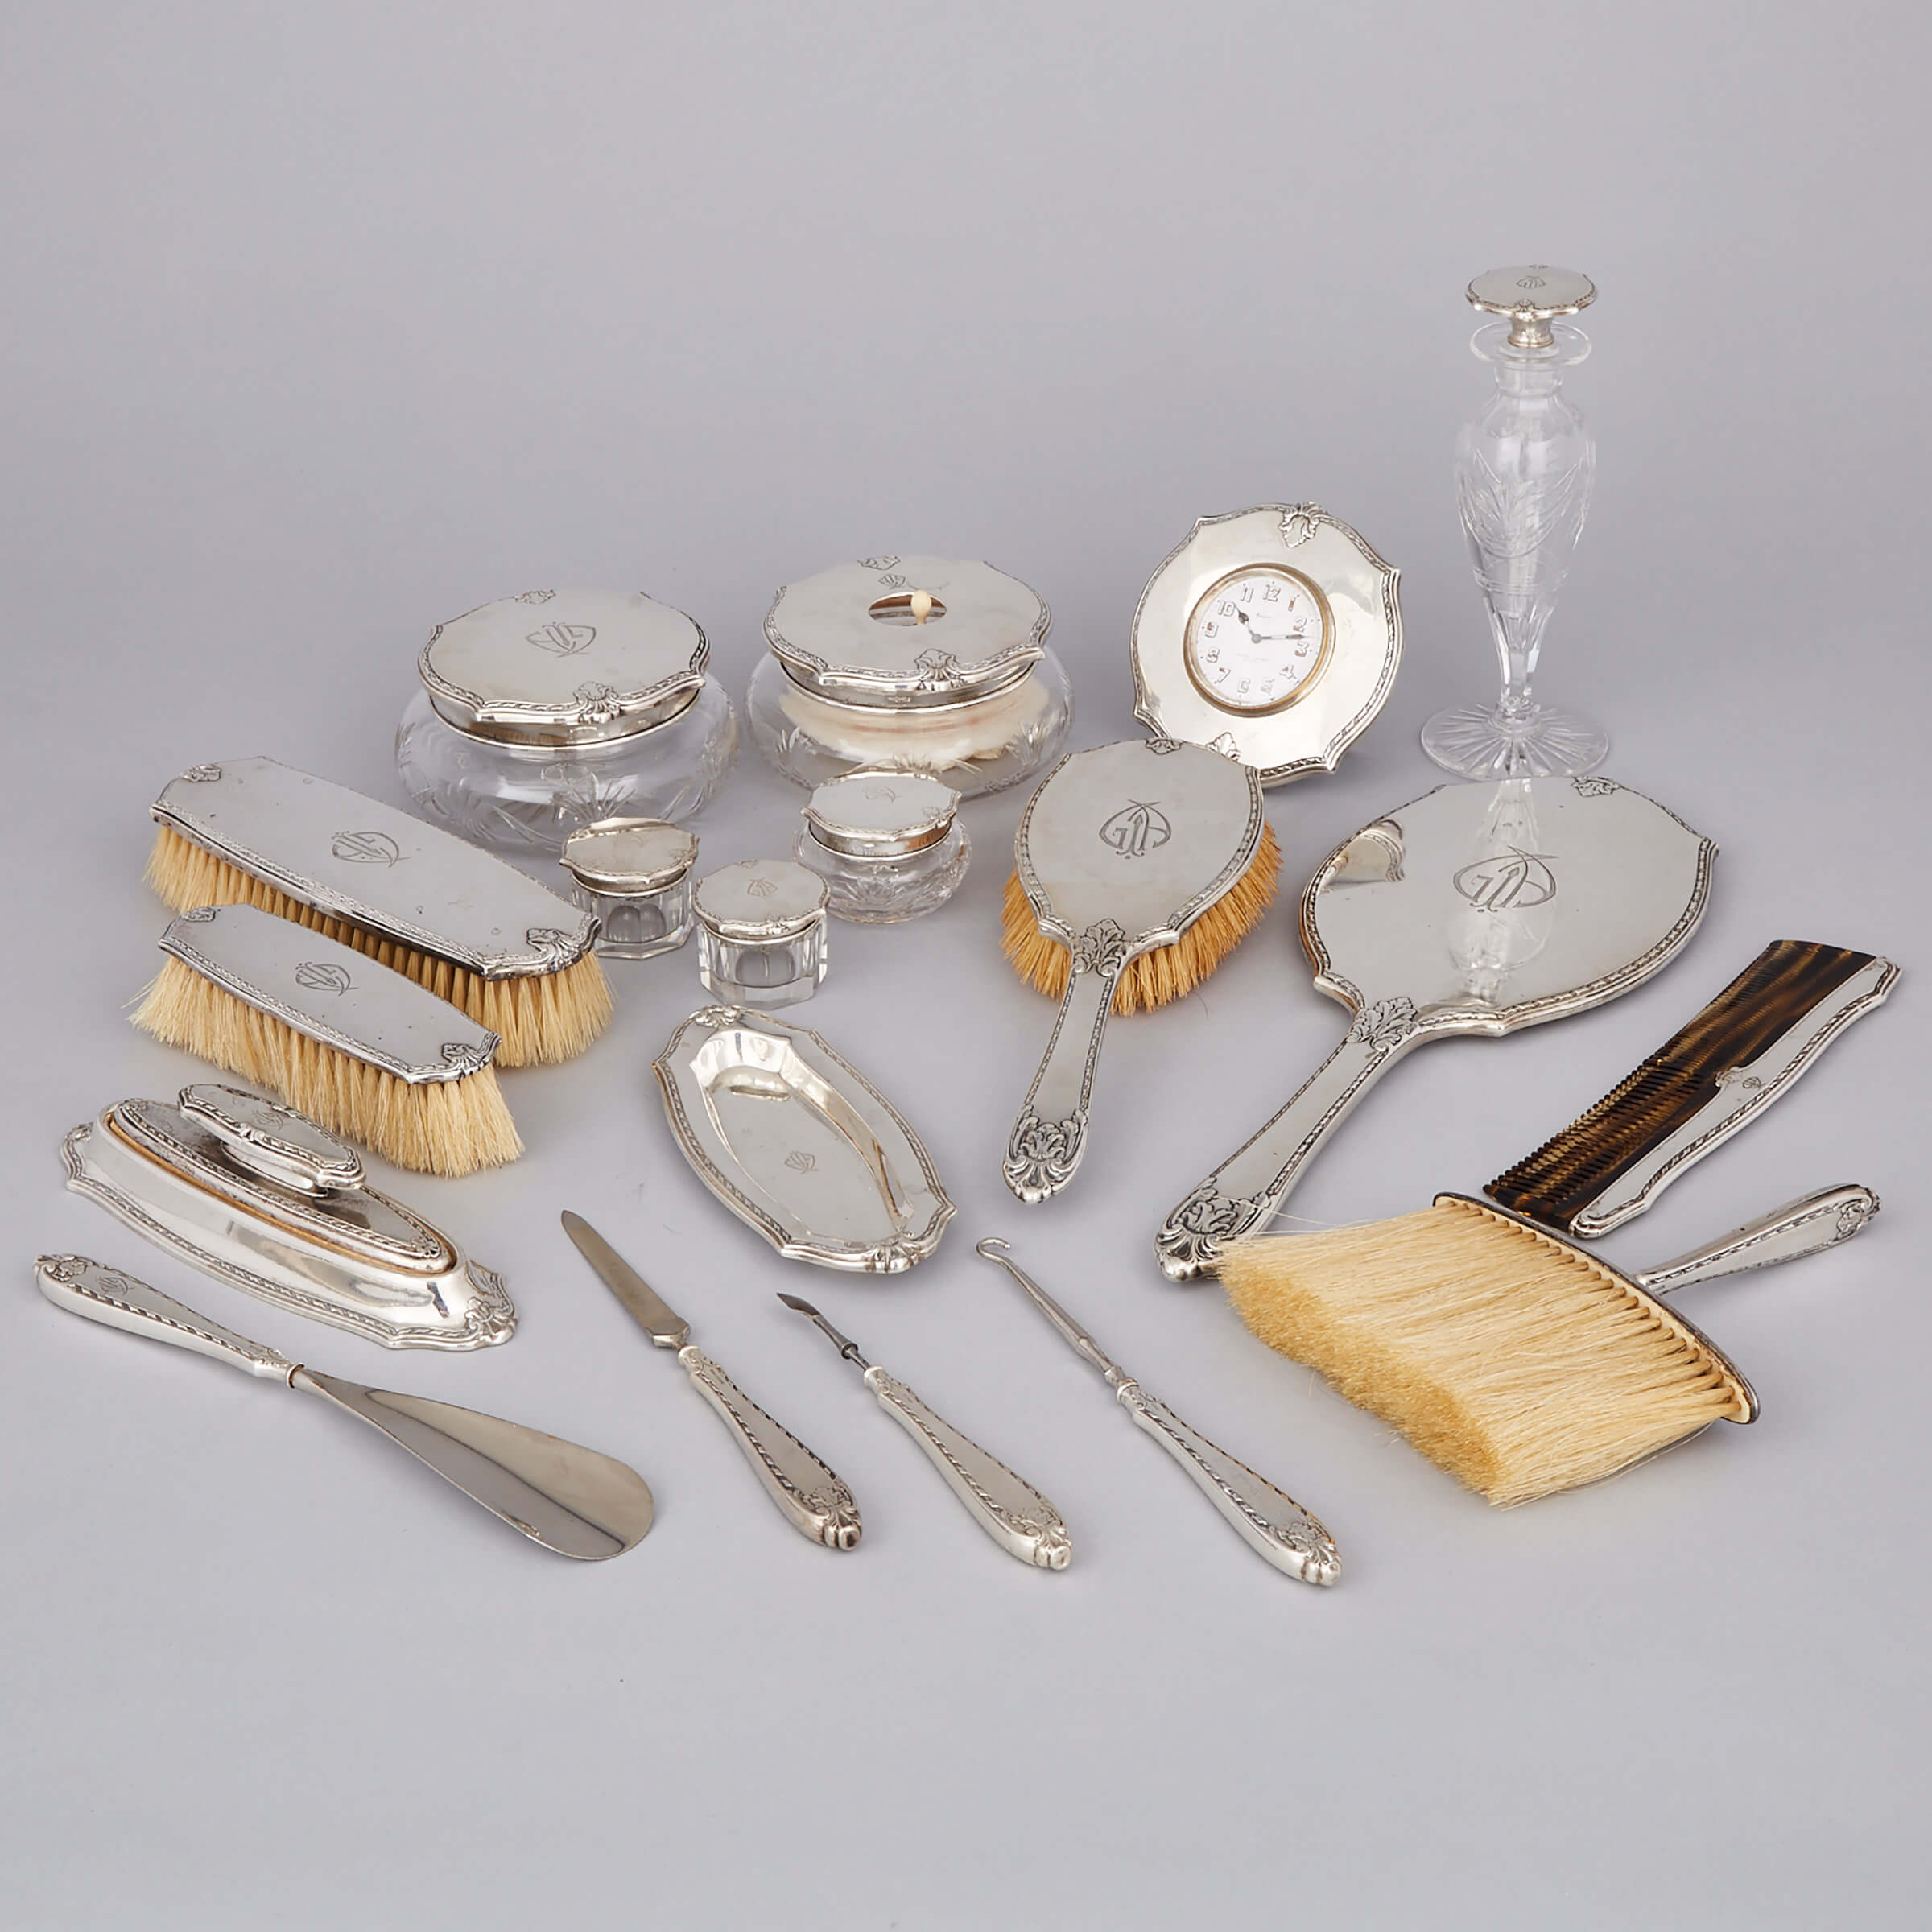 American Silver Mounted Dressing Table Set, R. Wallace & Sons, Wallingford, Ct., 20th century